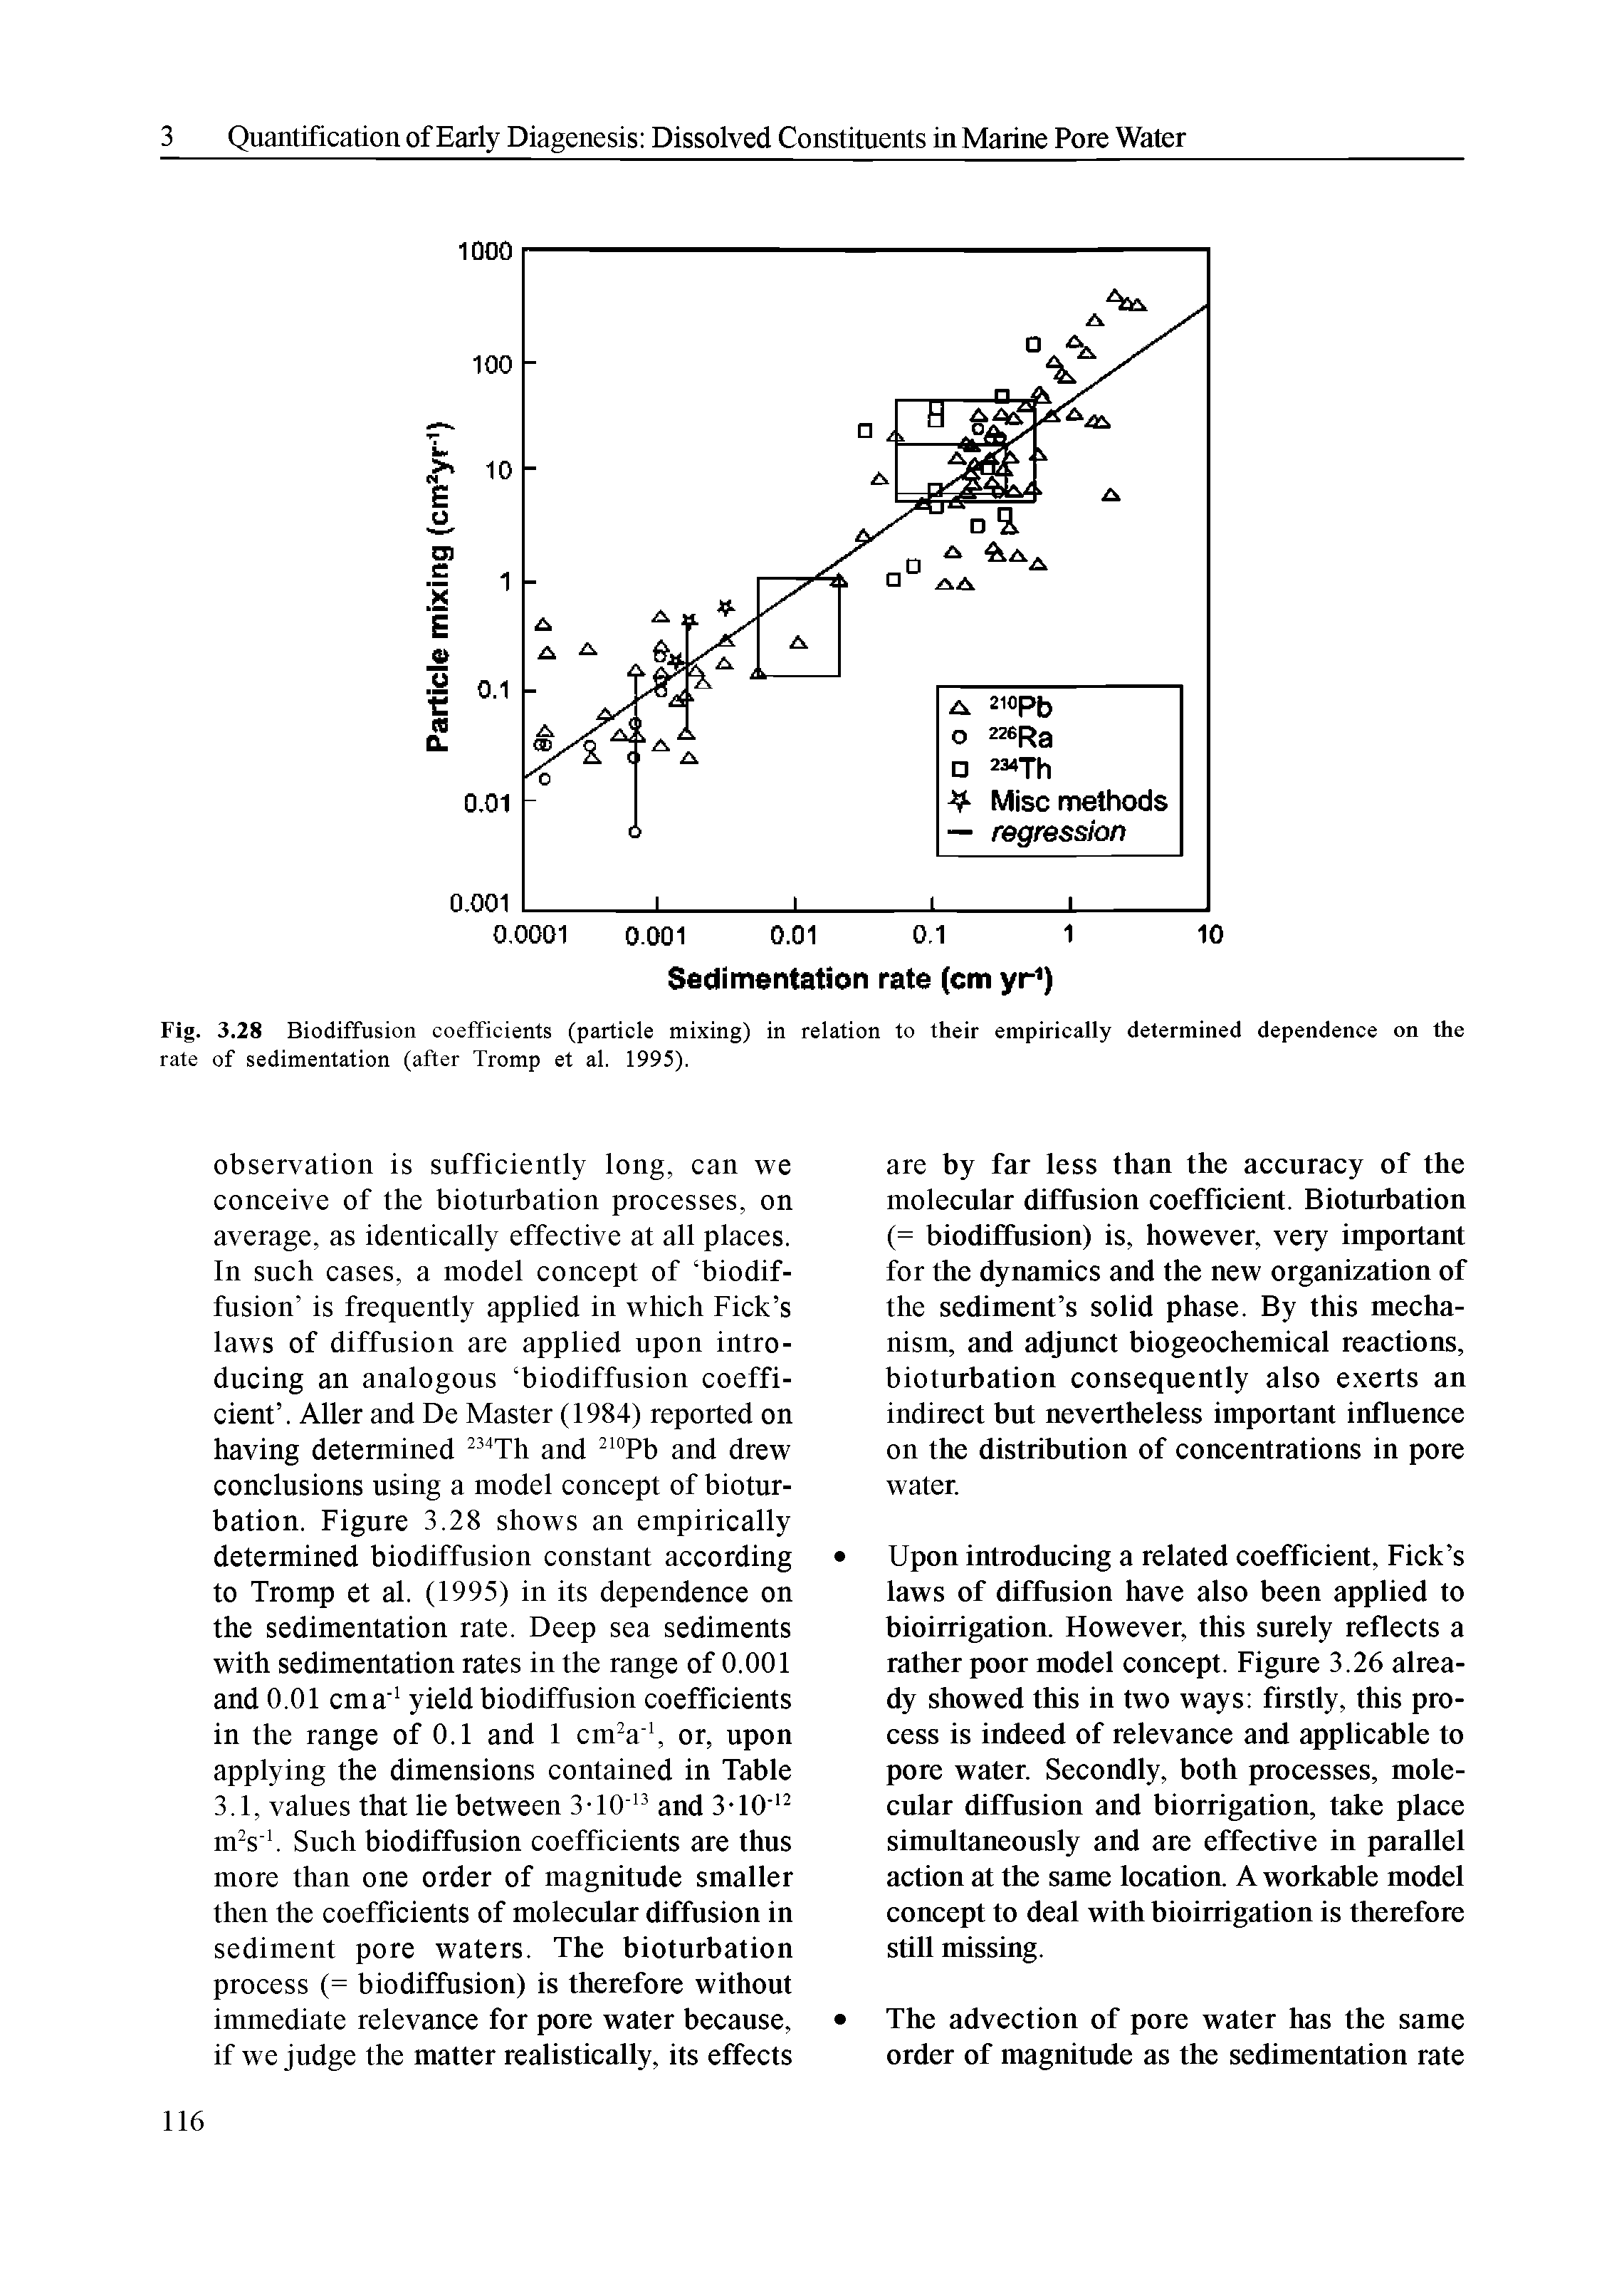 Fig. 3.28 Biodiffusion coefficients (particle mixing) in relation to their empirically determined dependence on the rate of sedimentation (after Tromp et al. 1995).